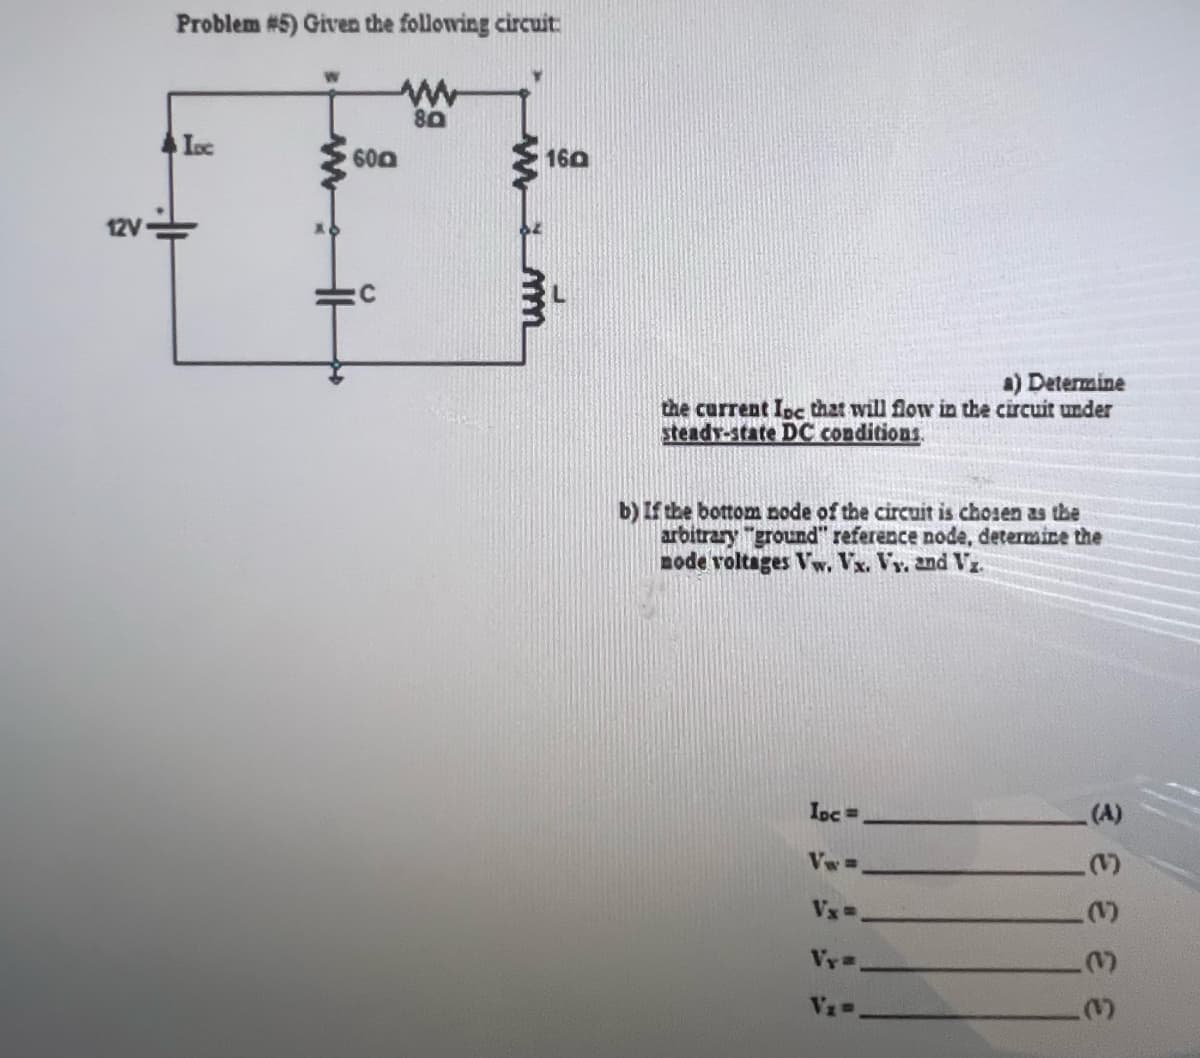 12V
Problem #5) Given the following circuit
www
80
Loc
www.
HH
60
:C
www.m
160
a) Determine
the current Ipc that will flow in the circuit under
steady-state DC conditions.
b) If the bottom node of the circuit is chosen as the
arbitrary "ground" reference node, determine the
node voltages Vw. Vx. Vy. and Vz.
Ipc =
Vx=
Vy=
V₁=
3333